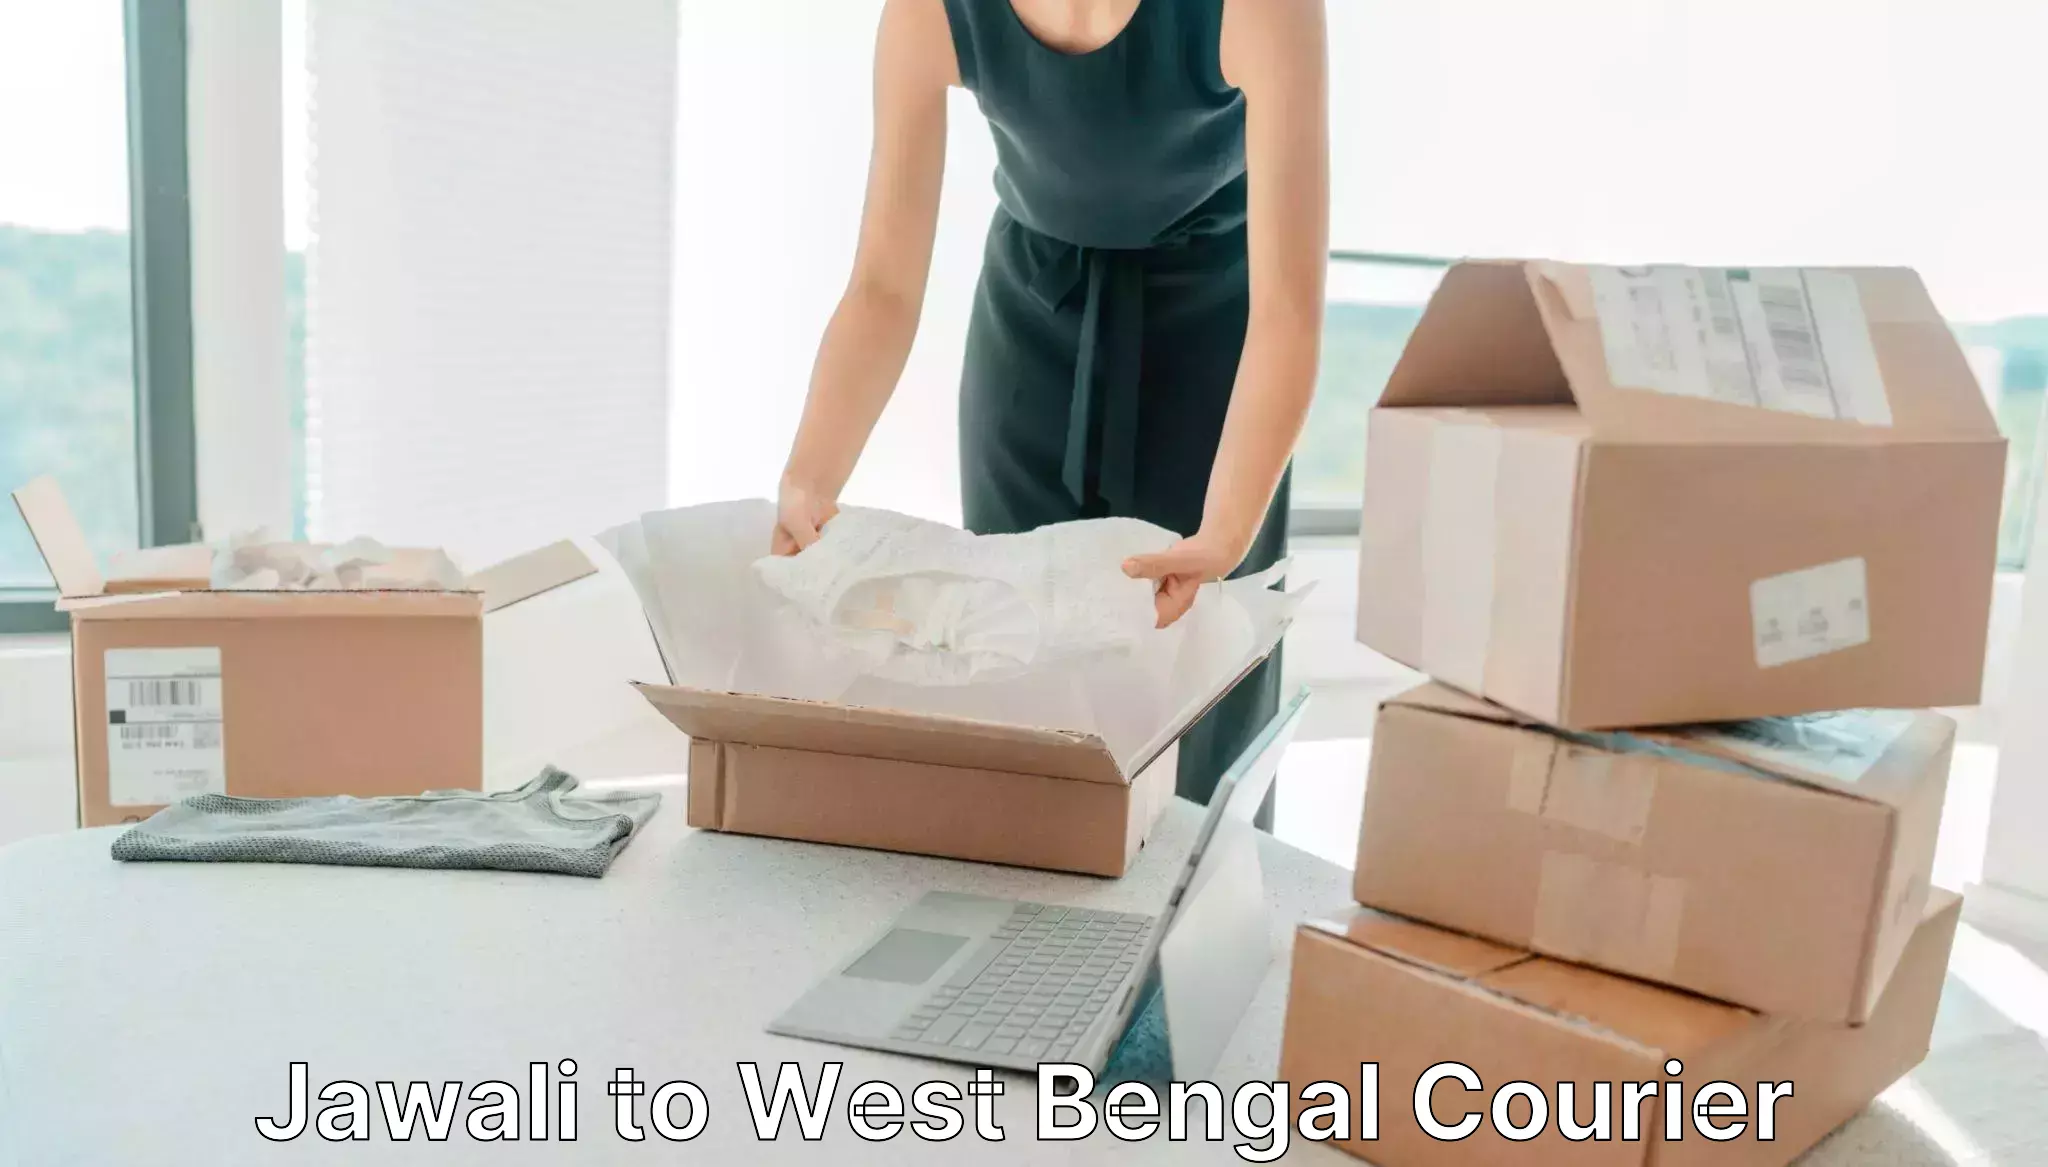 Delivery service partnership Jawali to West Bengal